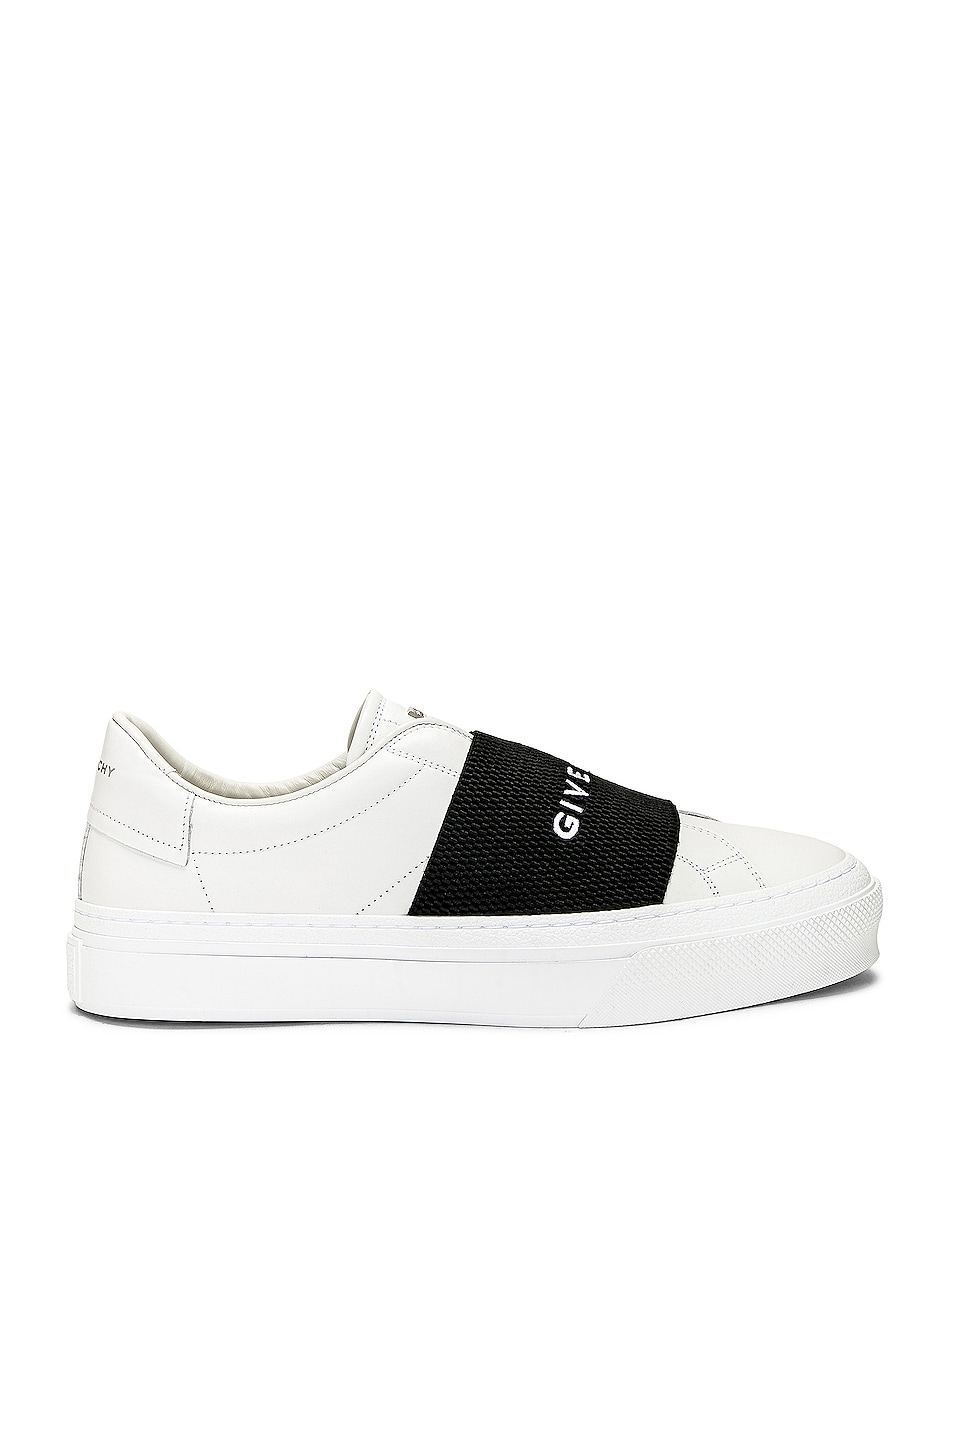 Image 1 of Givenchy City Sport Sneaker in White & Black